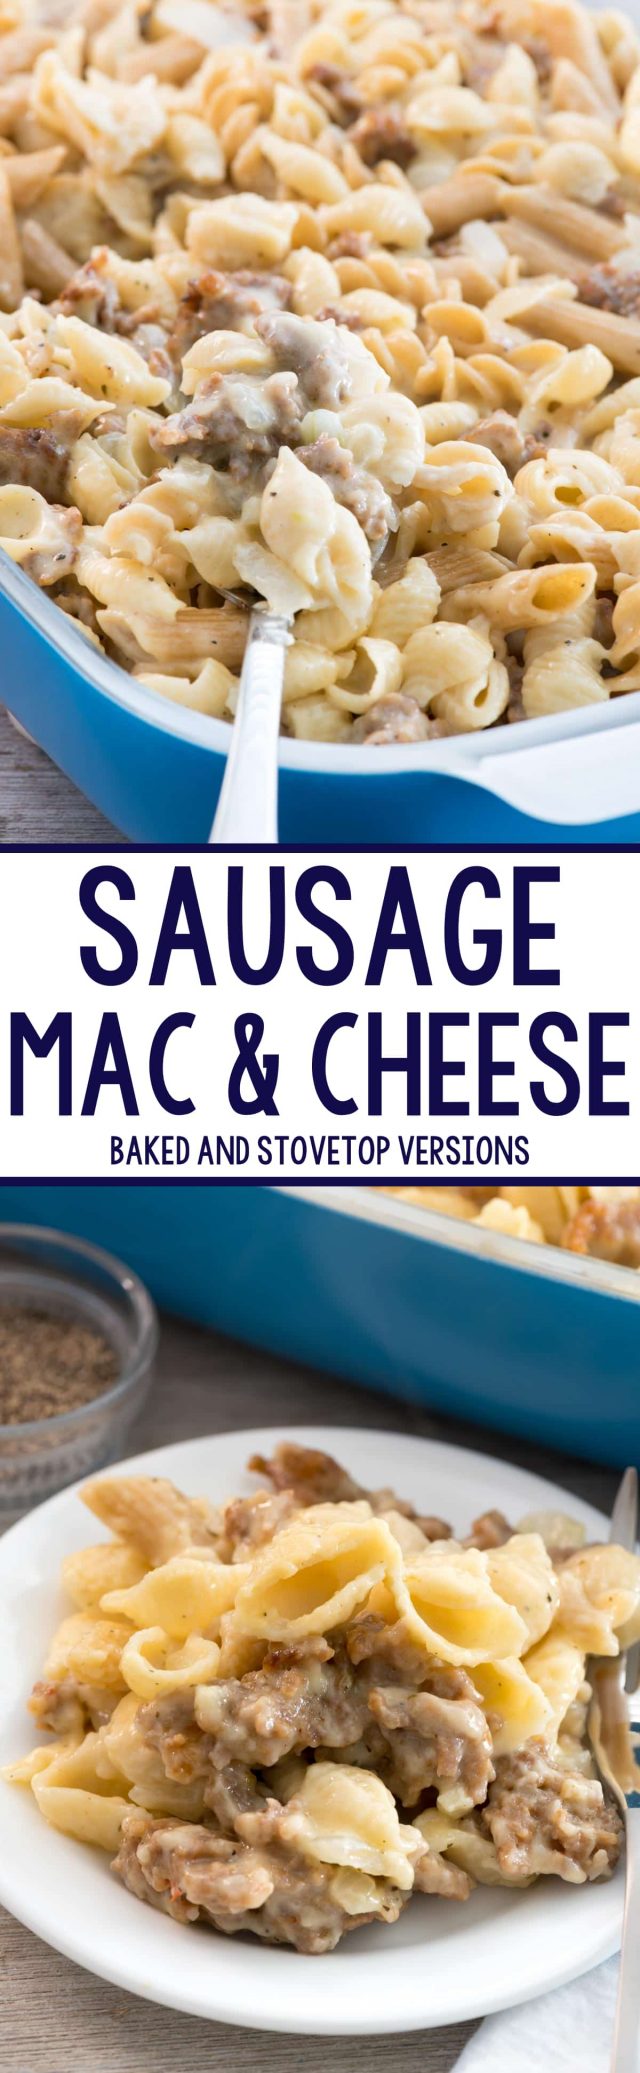 Sausage macaroni and cheese is the perfect mac & cheese, because this EASY macaroni and cheese recipe is full of Italian sausage! It's a fantastic comfort food meal.